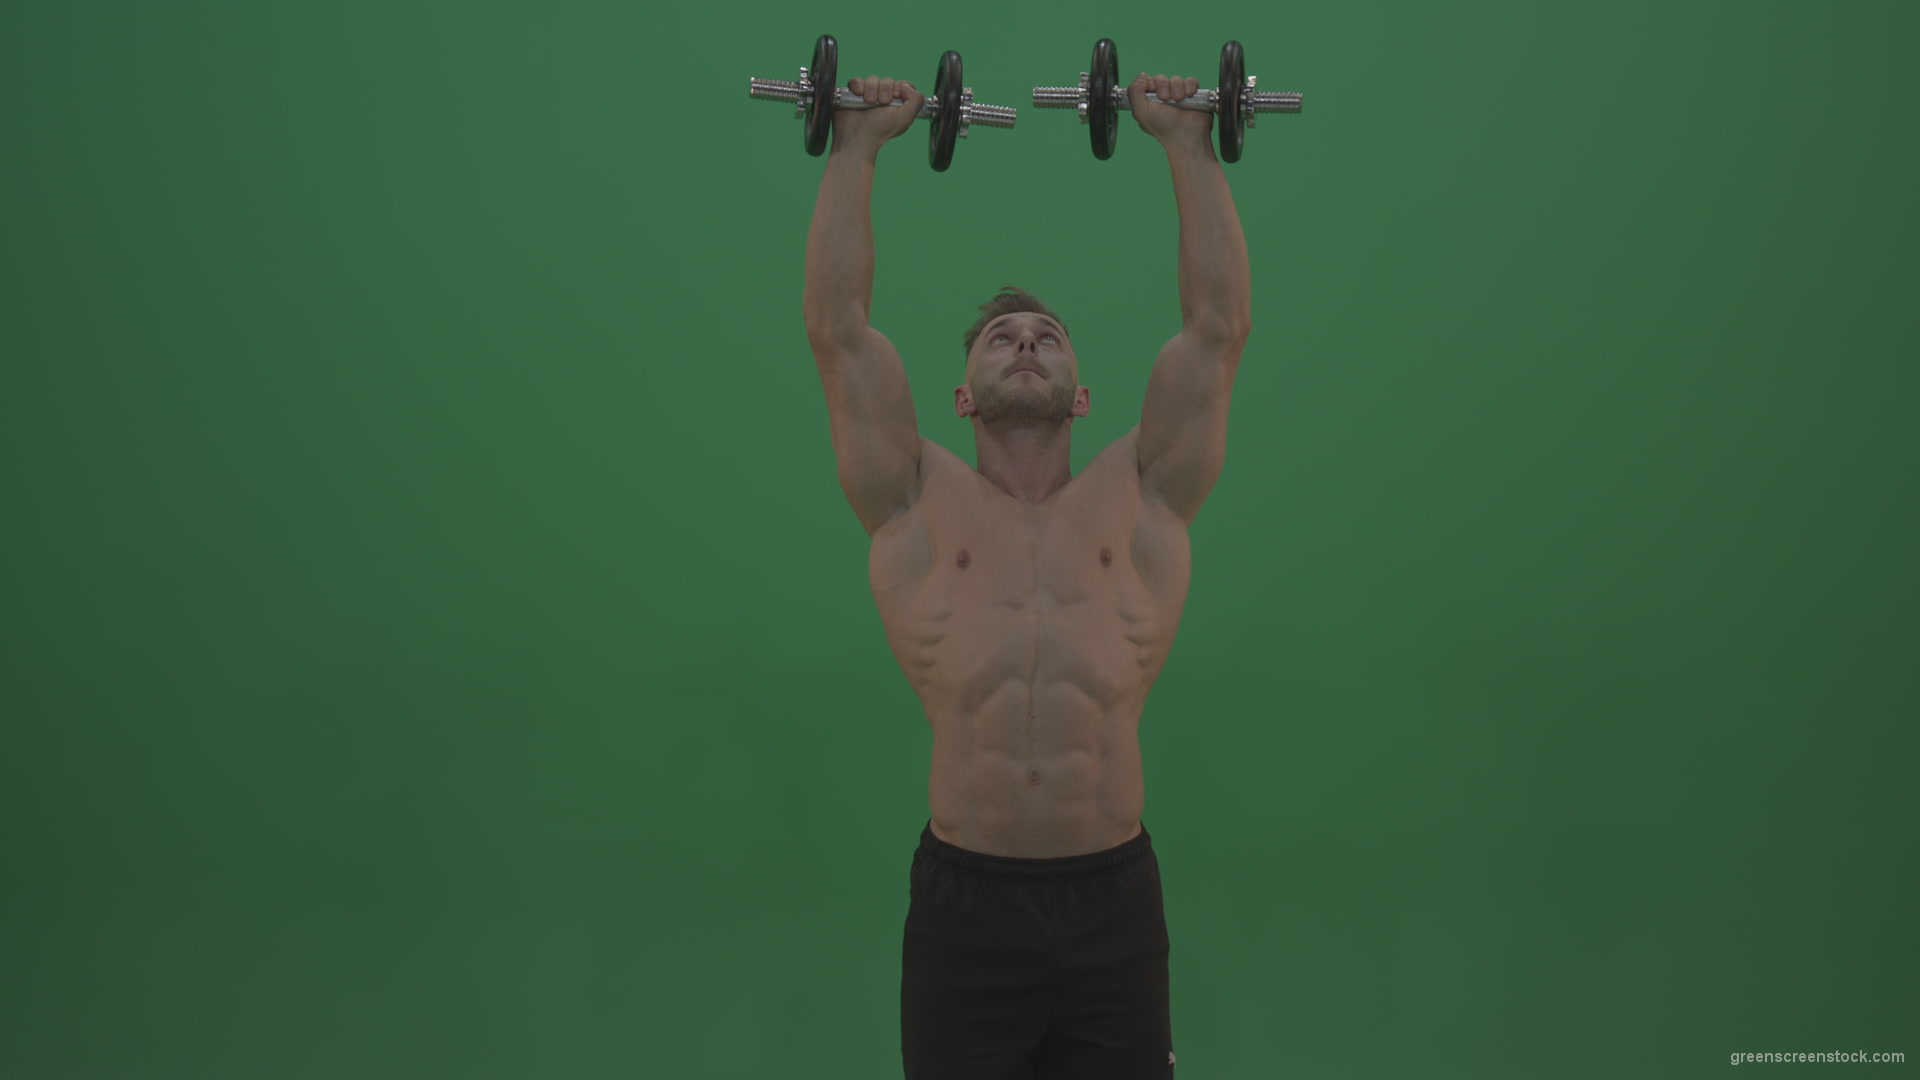 Young_Athlete_Doing_Two_Handed_Excercises_Workout_With_Dumbbells_For_Triceps_And_Pectoral_Muscles_On_Green_Screen_Wall_Background_006 Green Screen Stock